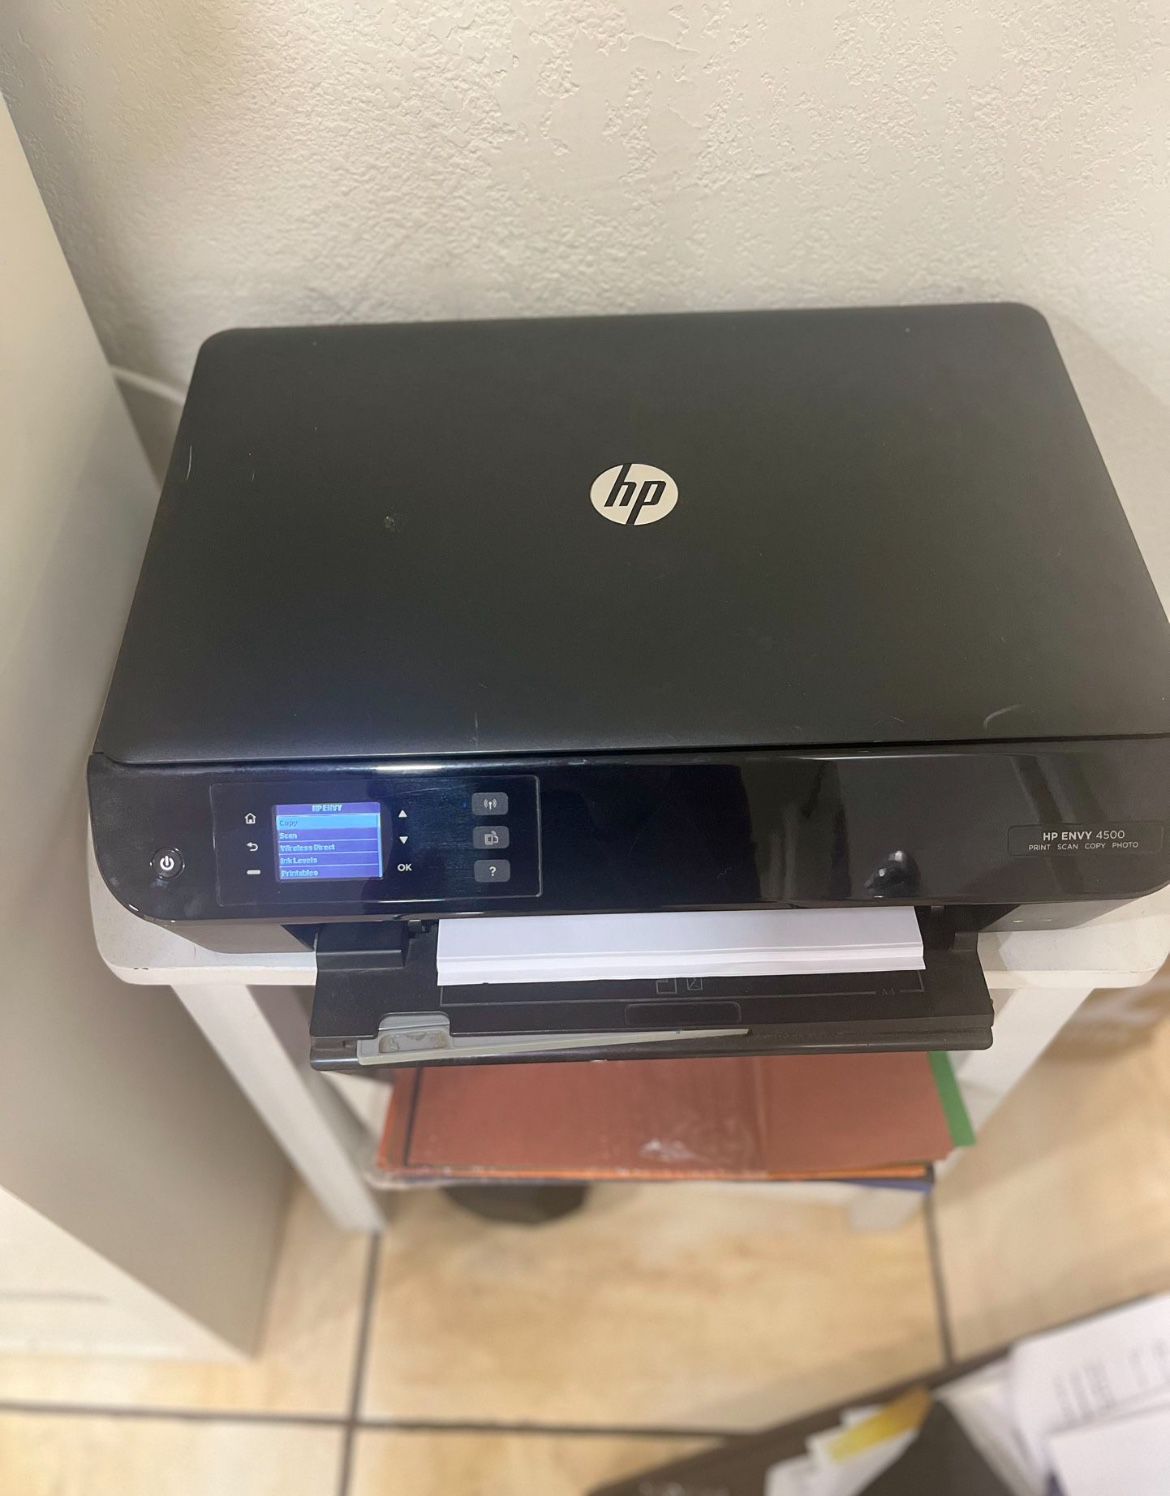 Hp Envy 4500 Printer, Scanner,copy And Photo 